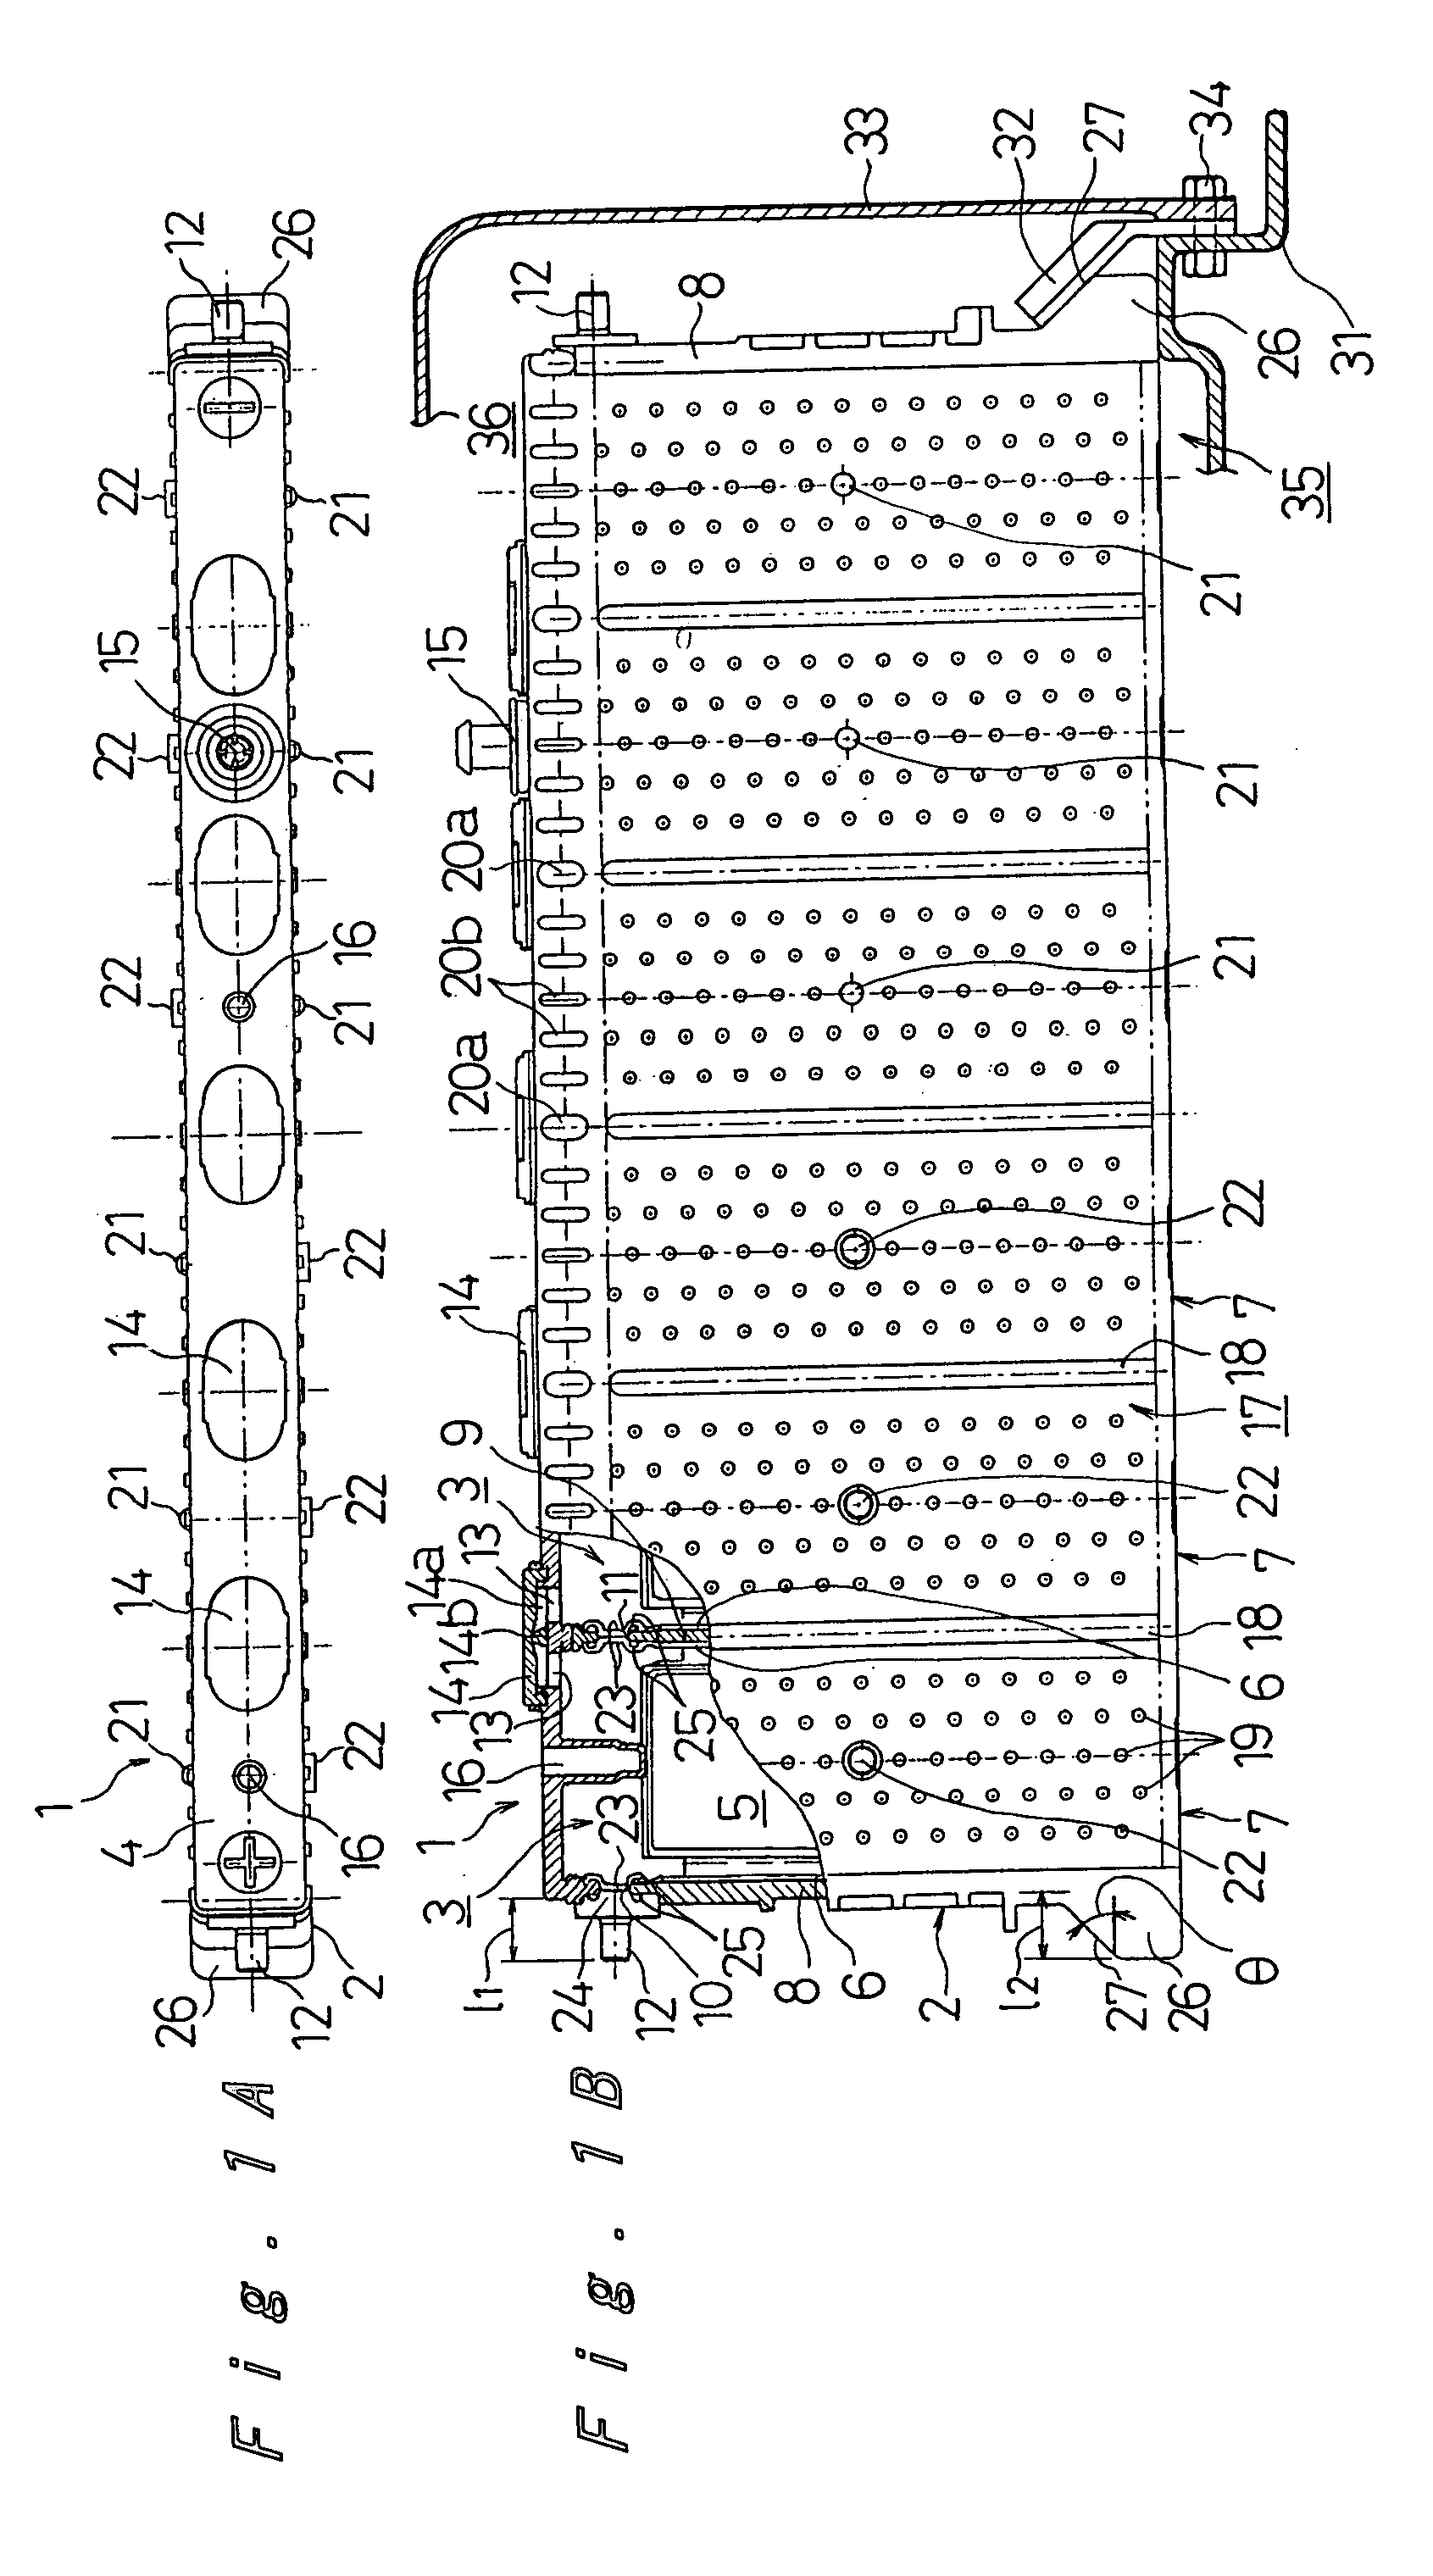 Structure for electrode terminals of battery module